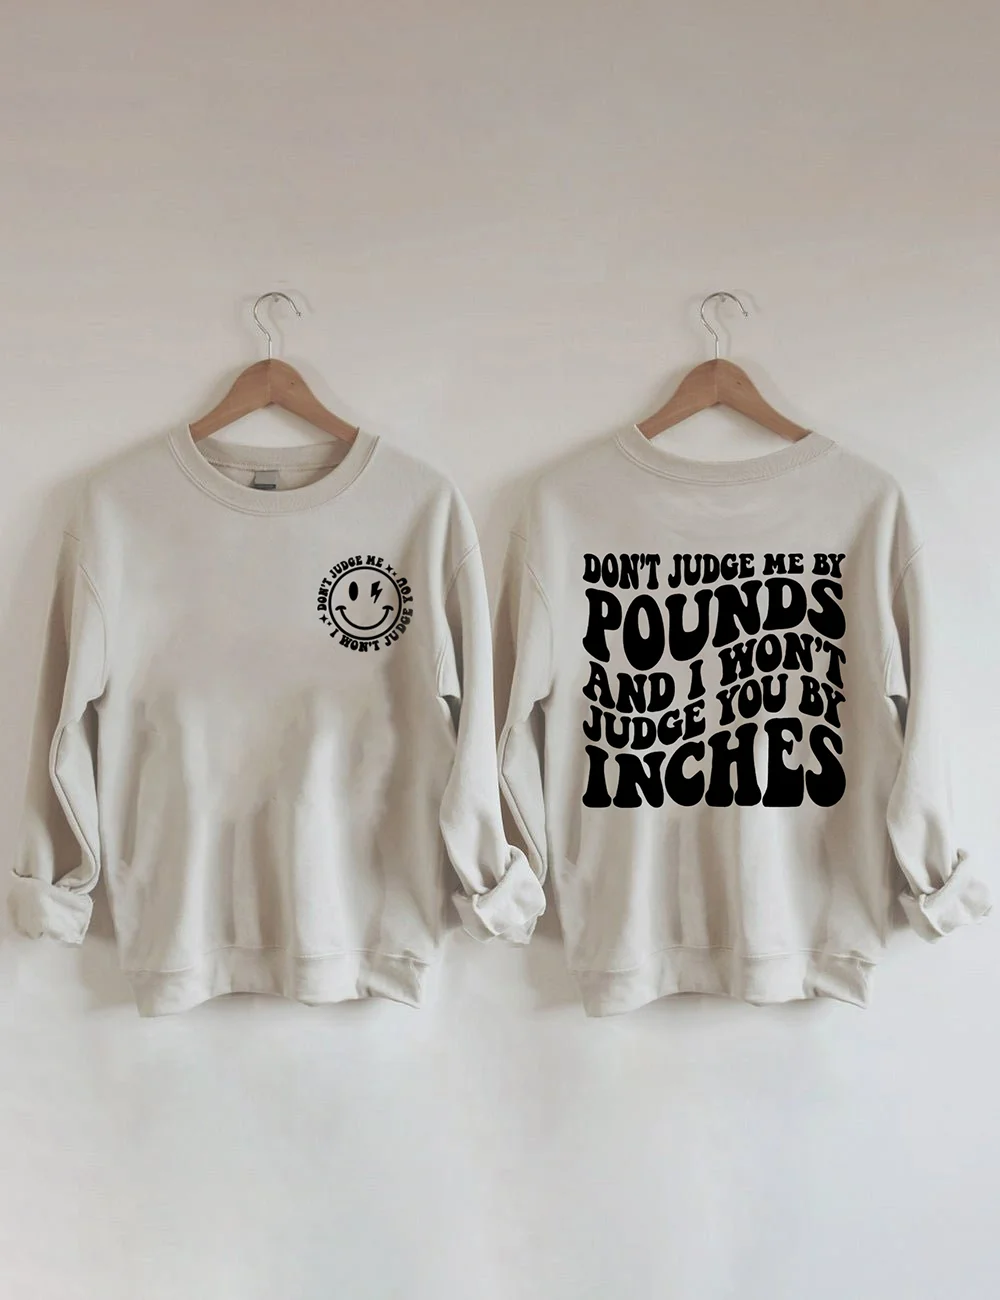 Don't Judge Me By Pounds And I Won't Judge You By Inches Sweatshirt